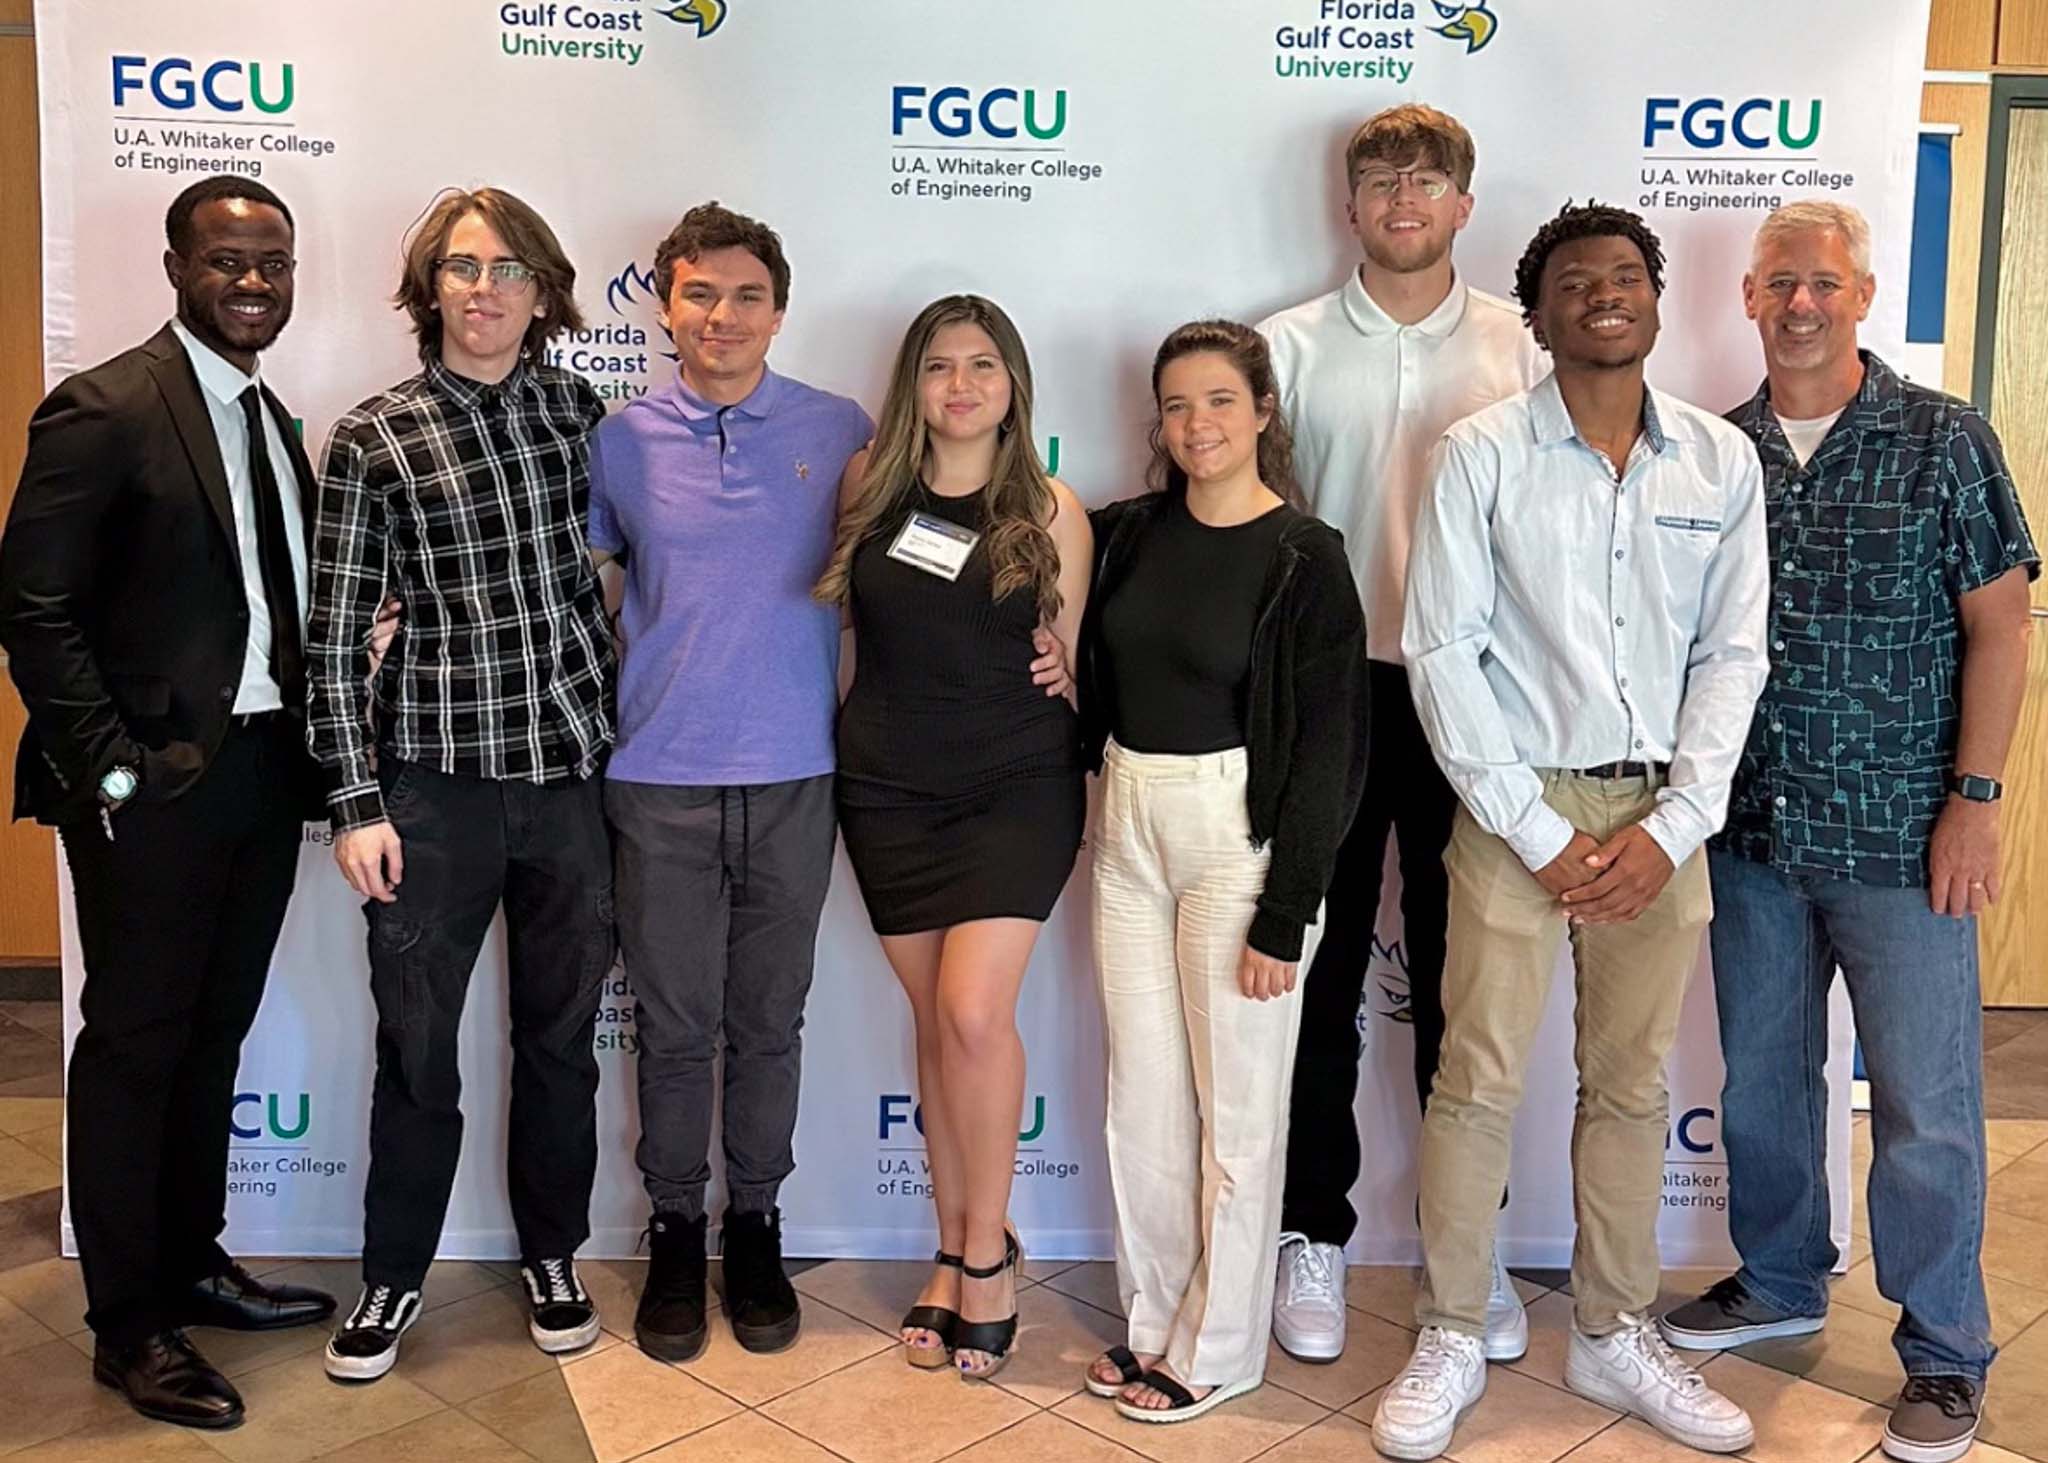 Group of students standing in front of a white backdrop with the FGCU logo